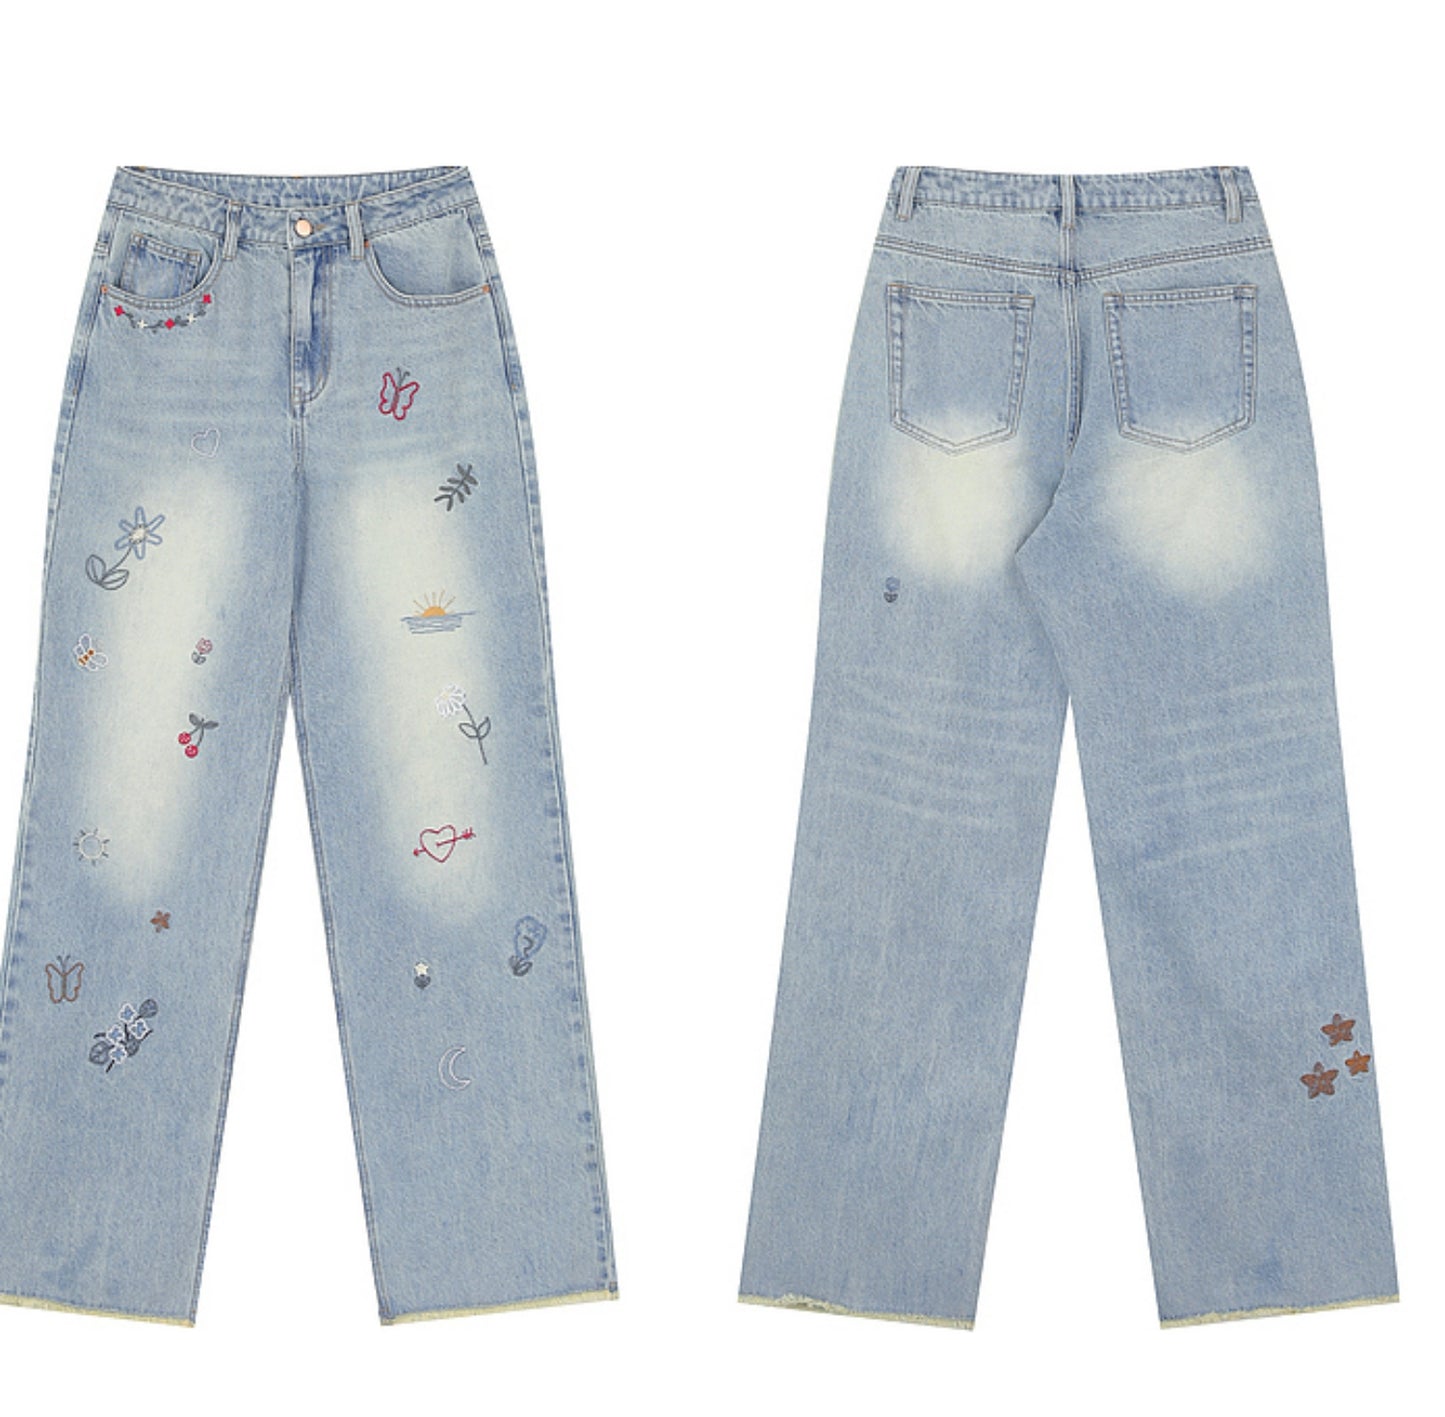 Pocket Light Farbe Hohe Taille Jeans